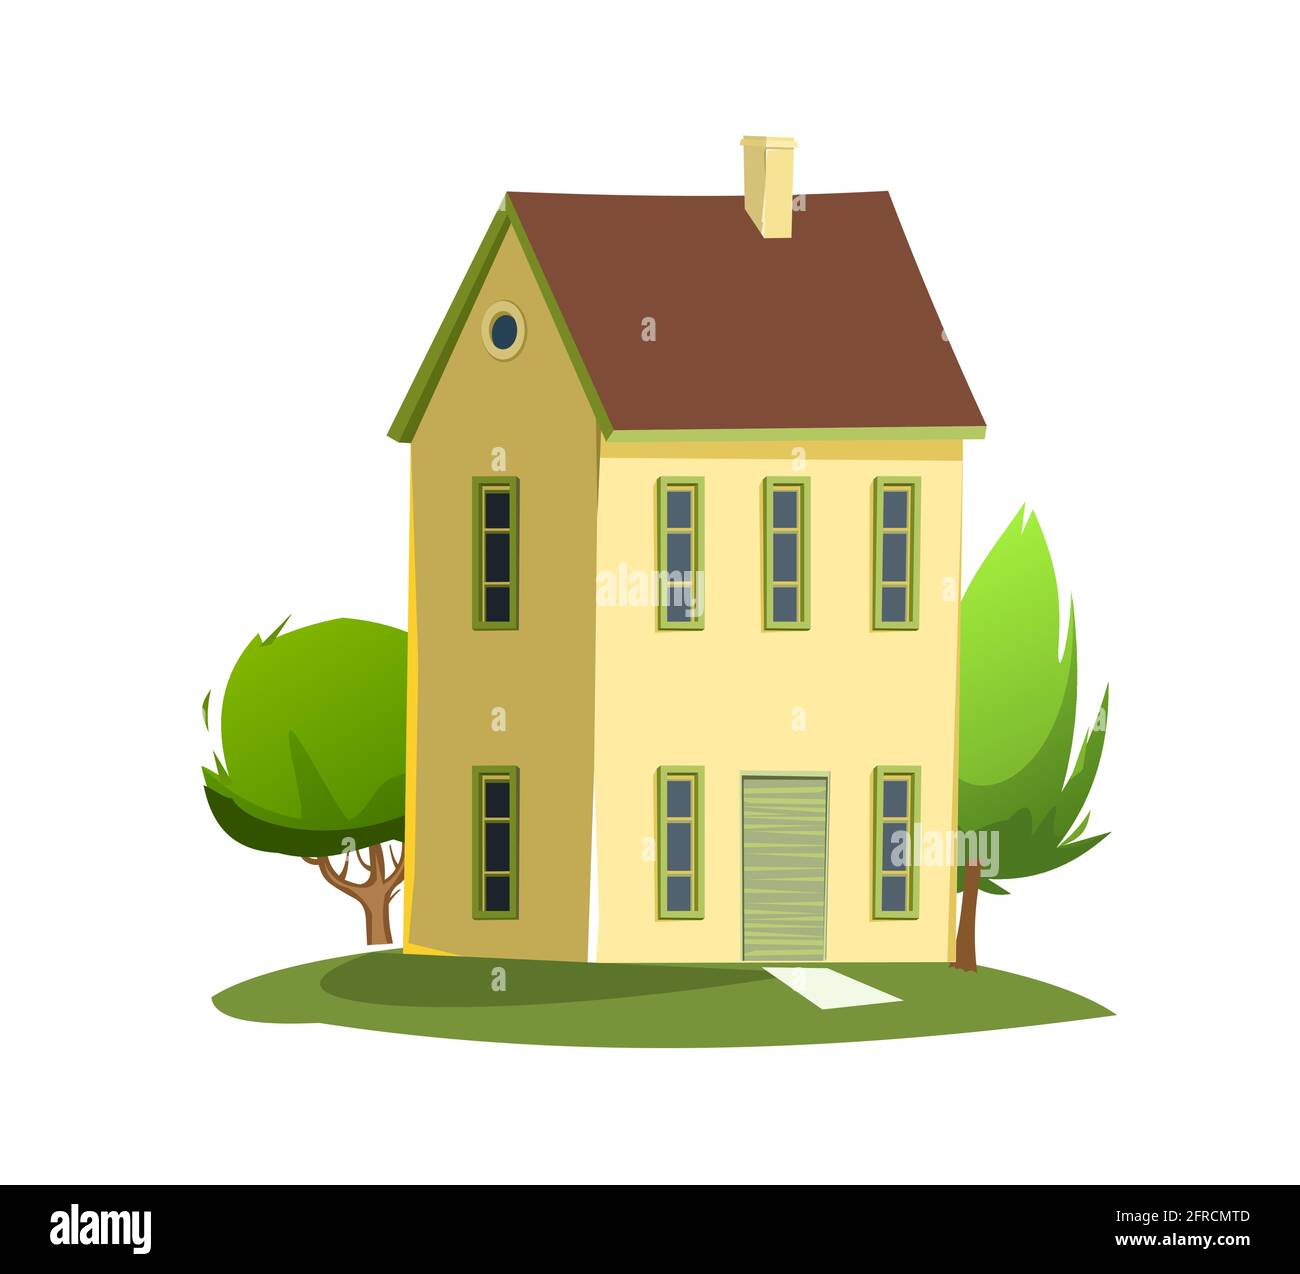 Rural house in the meadow. Half turn. Cheerful cartoon flat style. Isolated on white background. Gable brown roof. Small cozy suburban cottage with tr Stock Vector